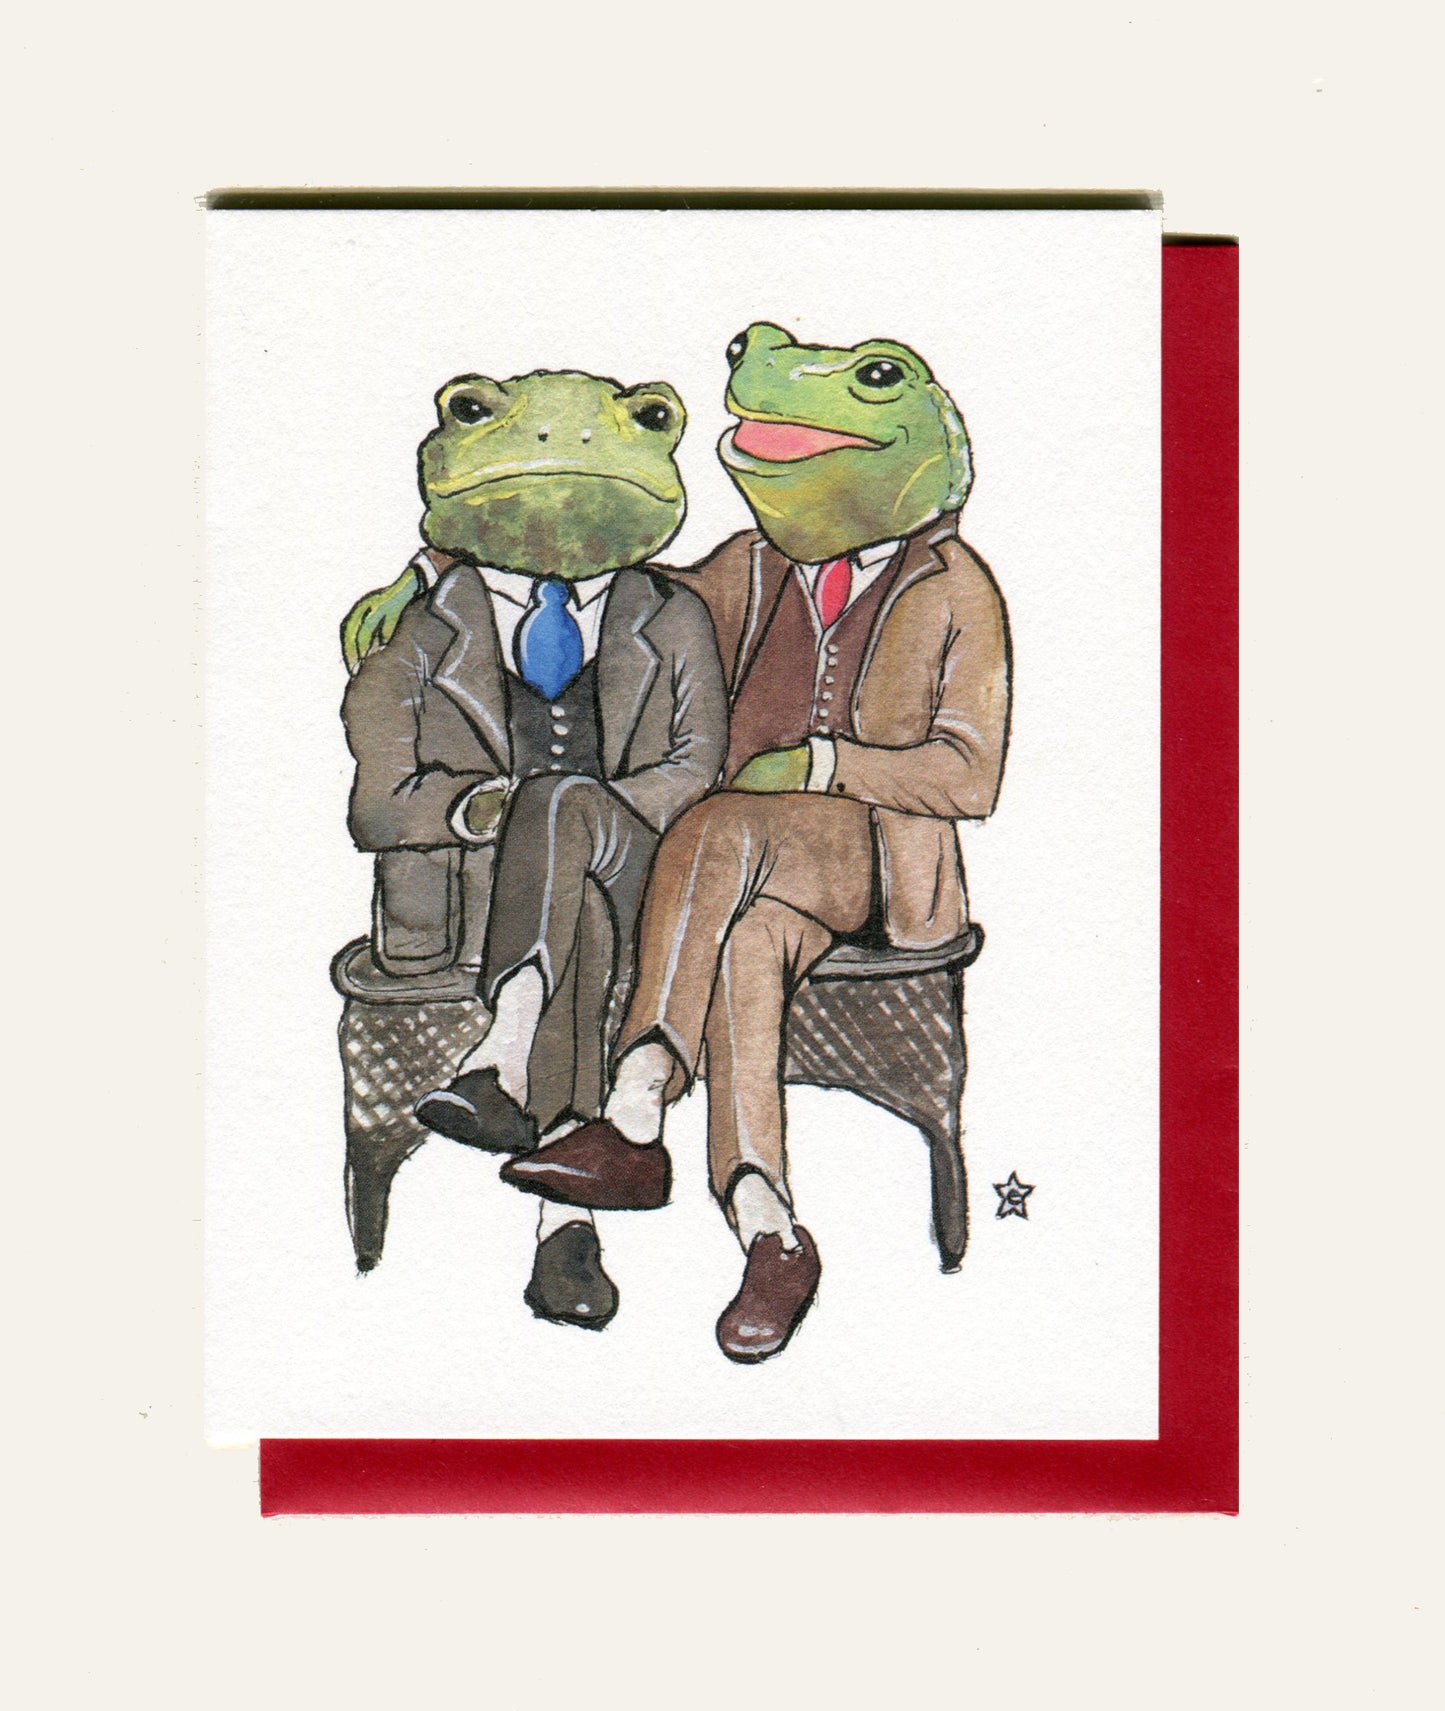 Greeting Cards - Darling Illustrations' Affectionate Animals